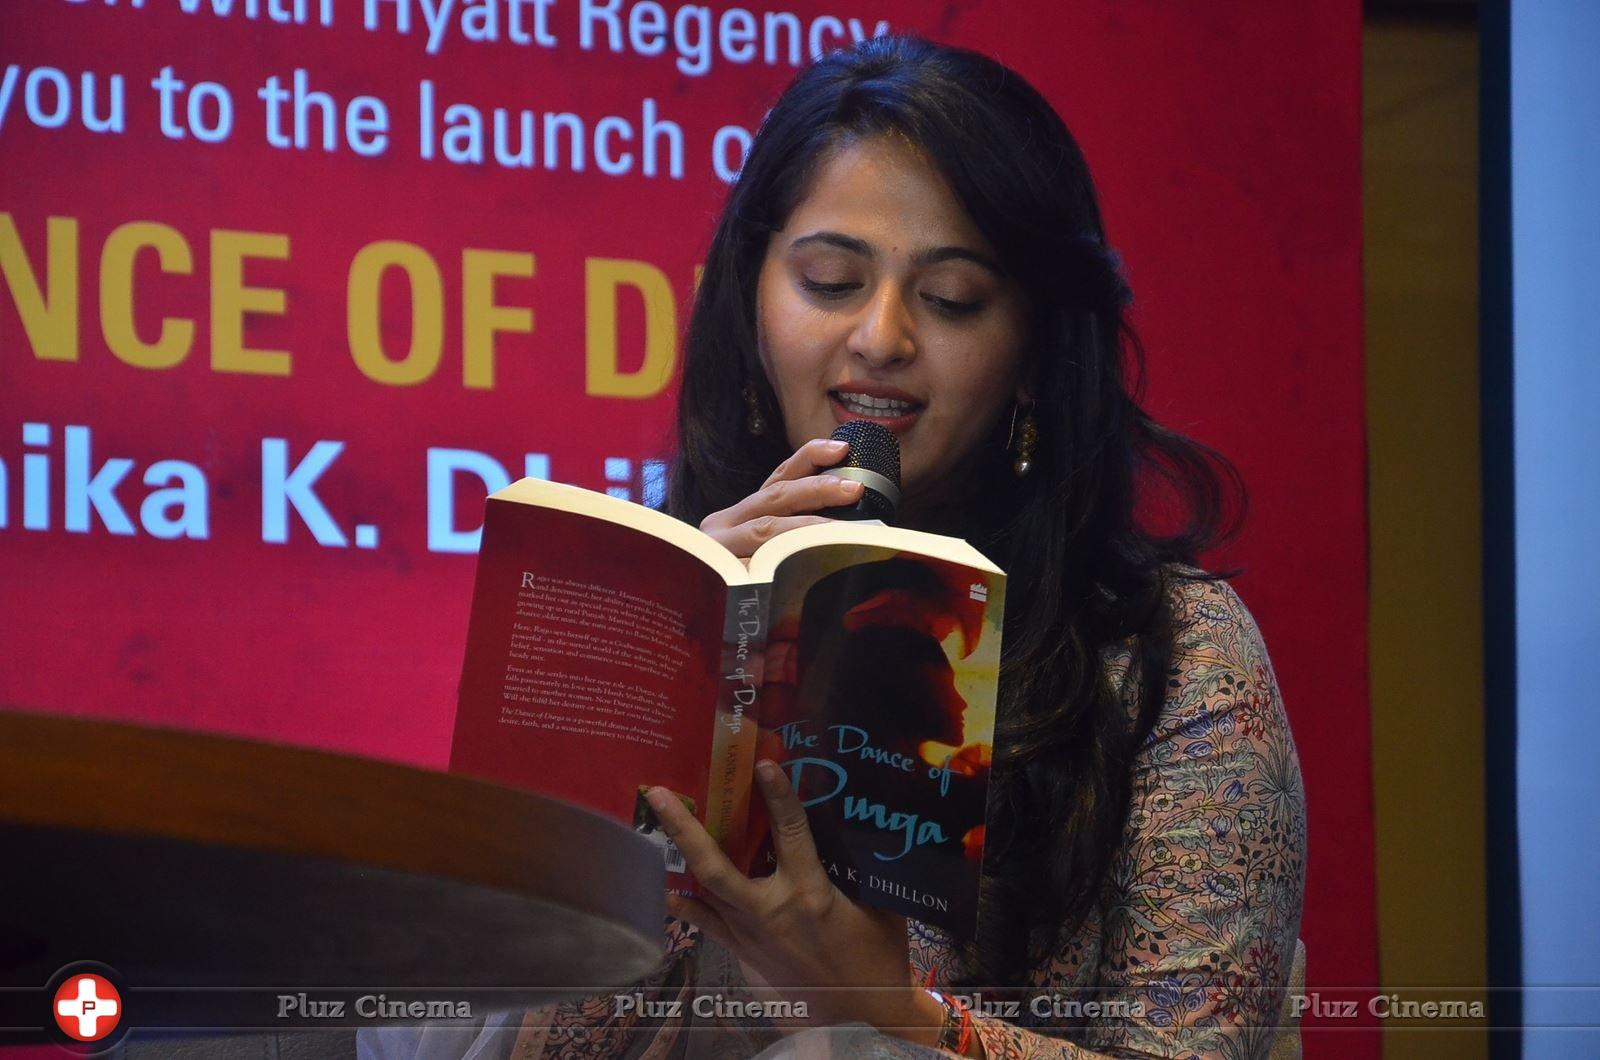 Anushka Shetty - The Dance Of Durga Book Launch Event Photos | Picture 1338270